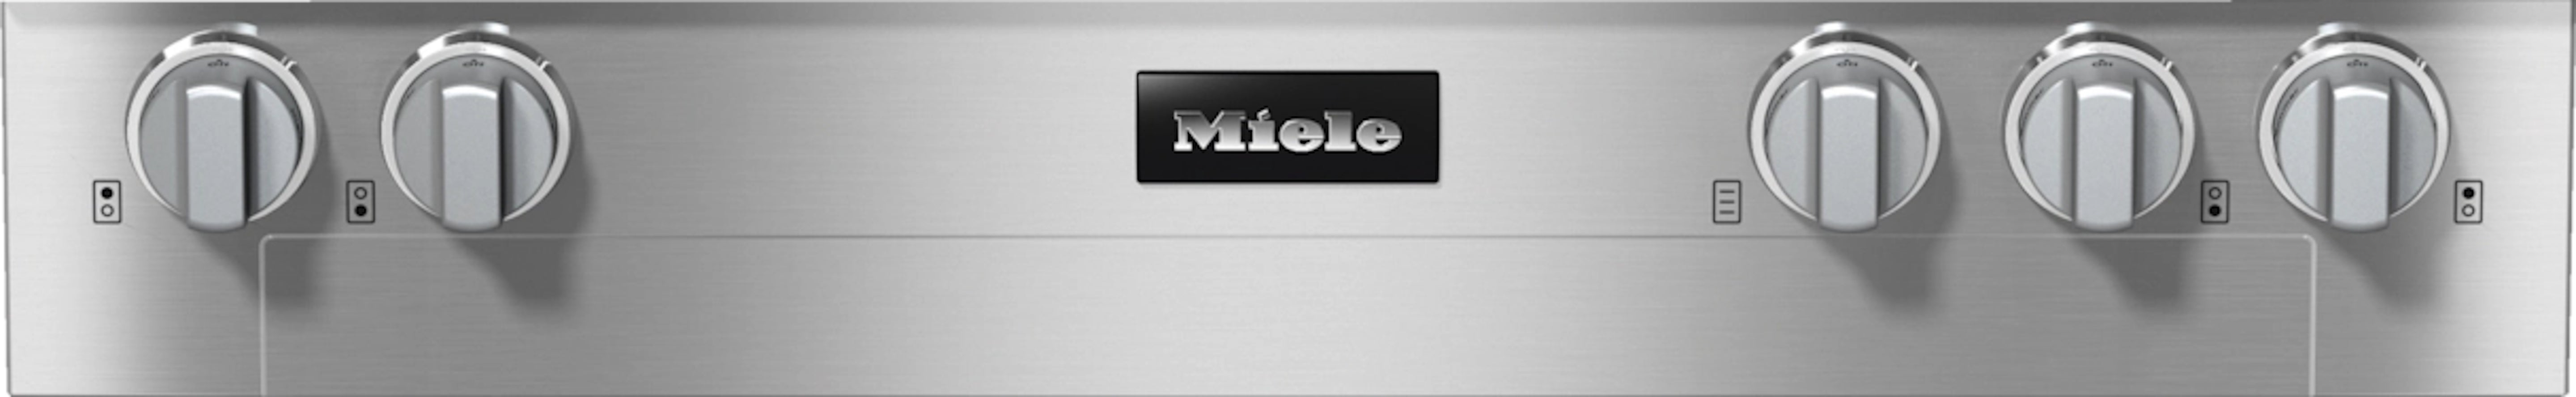 Miele - 36 Inch Gas Cooktop in Stainless - KMR 1135-3 G GR